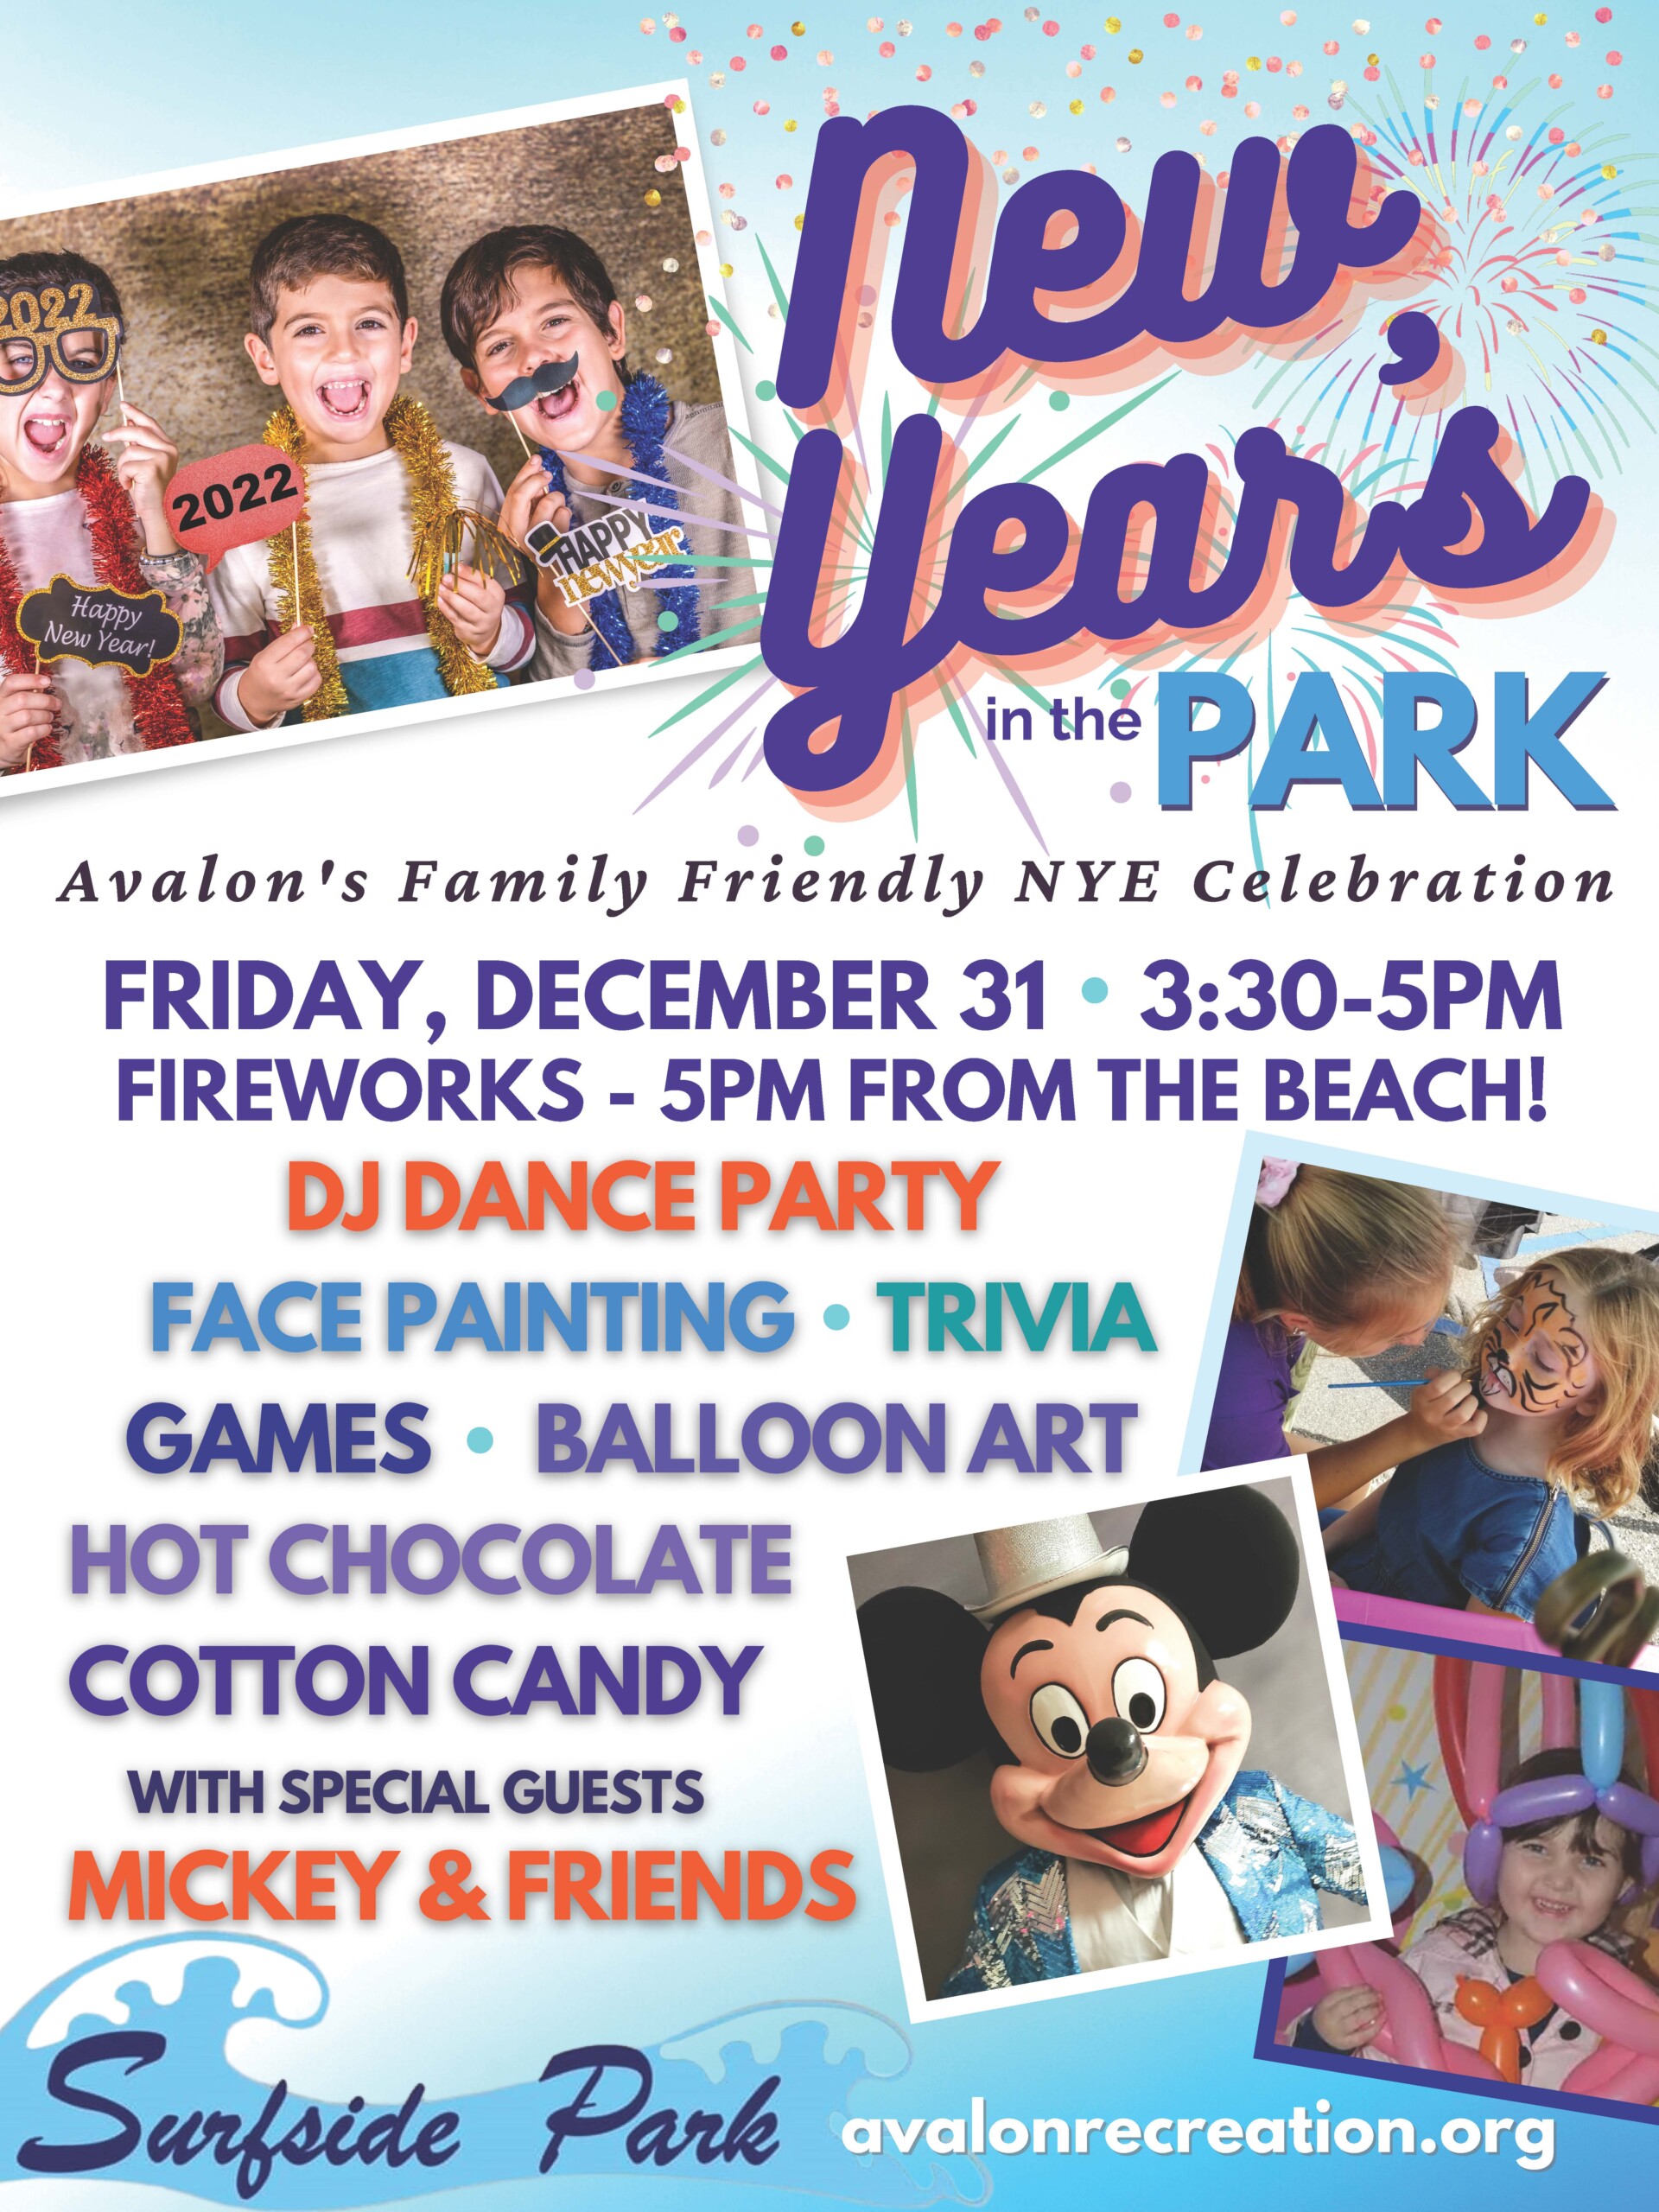 Avalon to Present New Year’s Eve Kids’ Party, Fireworks on December